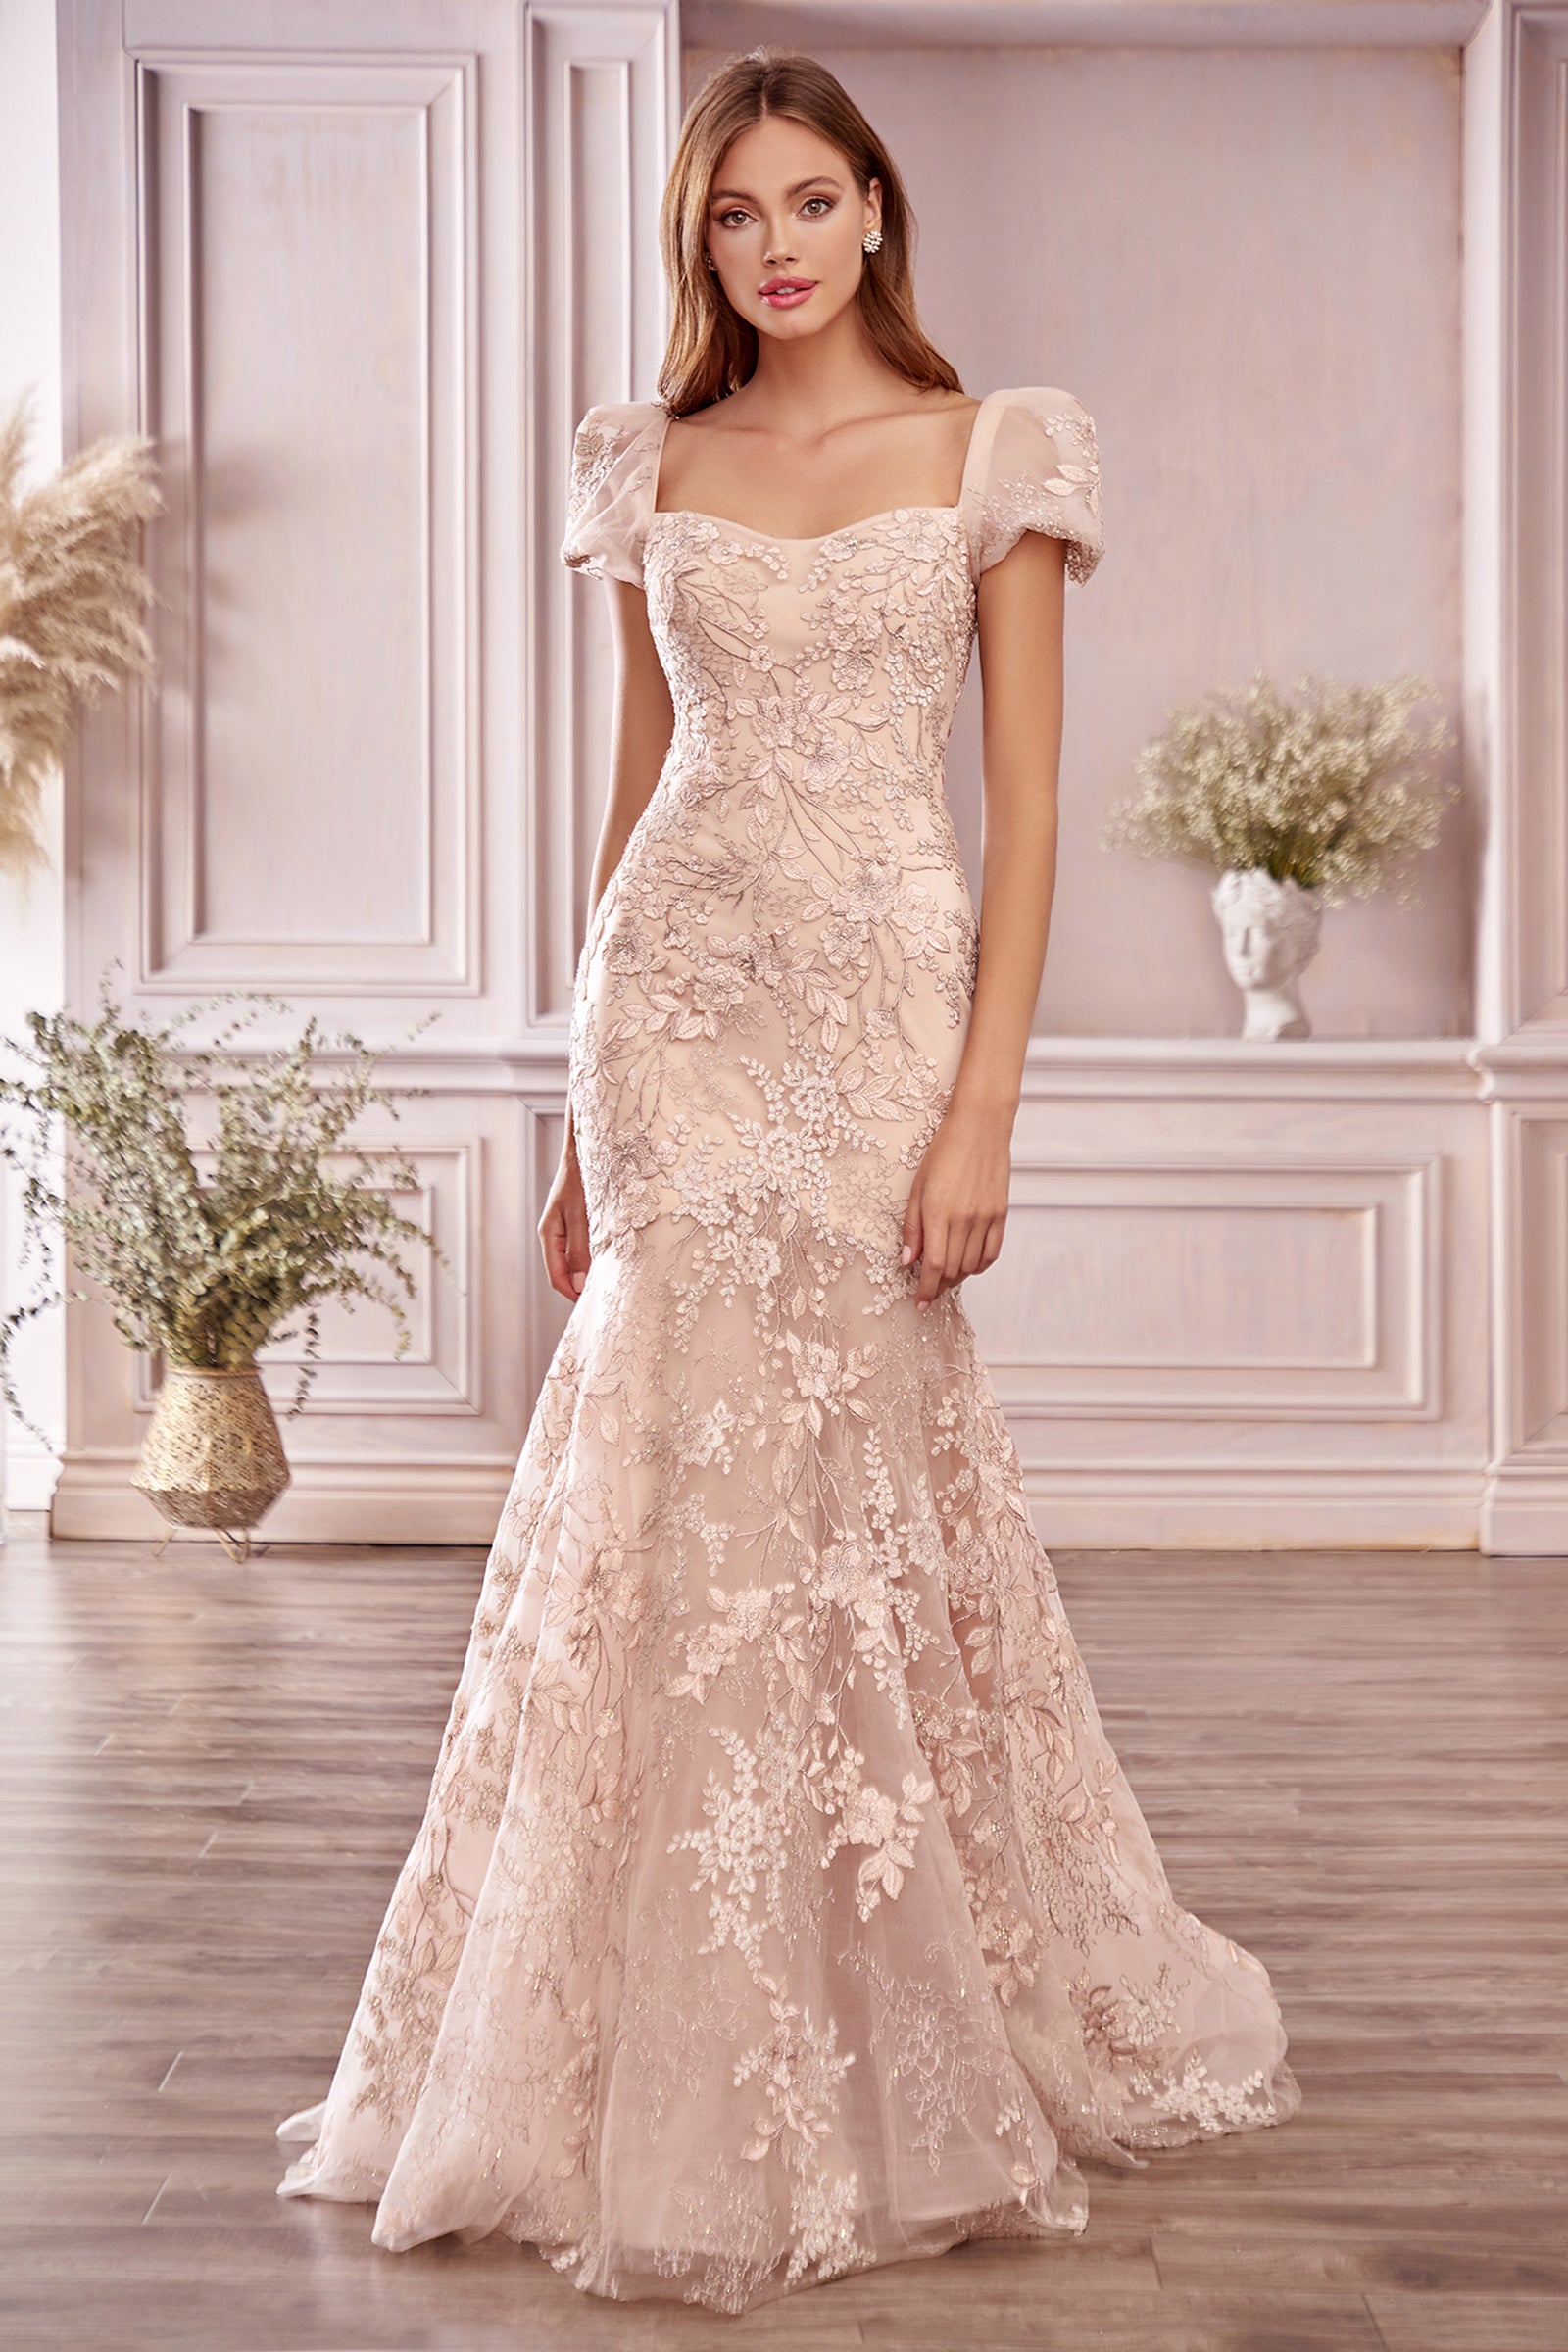 Blume Gown in soft blushing floral embroidery lace is inspired by an overgrown garden in spring. Romantic sweetheart neckline and sheer puff sleeve compliment the slim mermaid silhouette filled with silk thread florals. Slight stretch in the lining makes